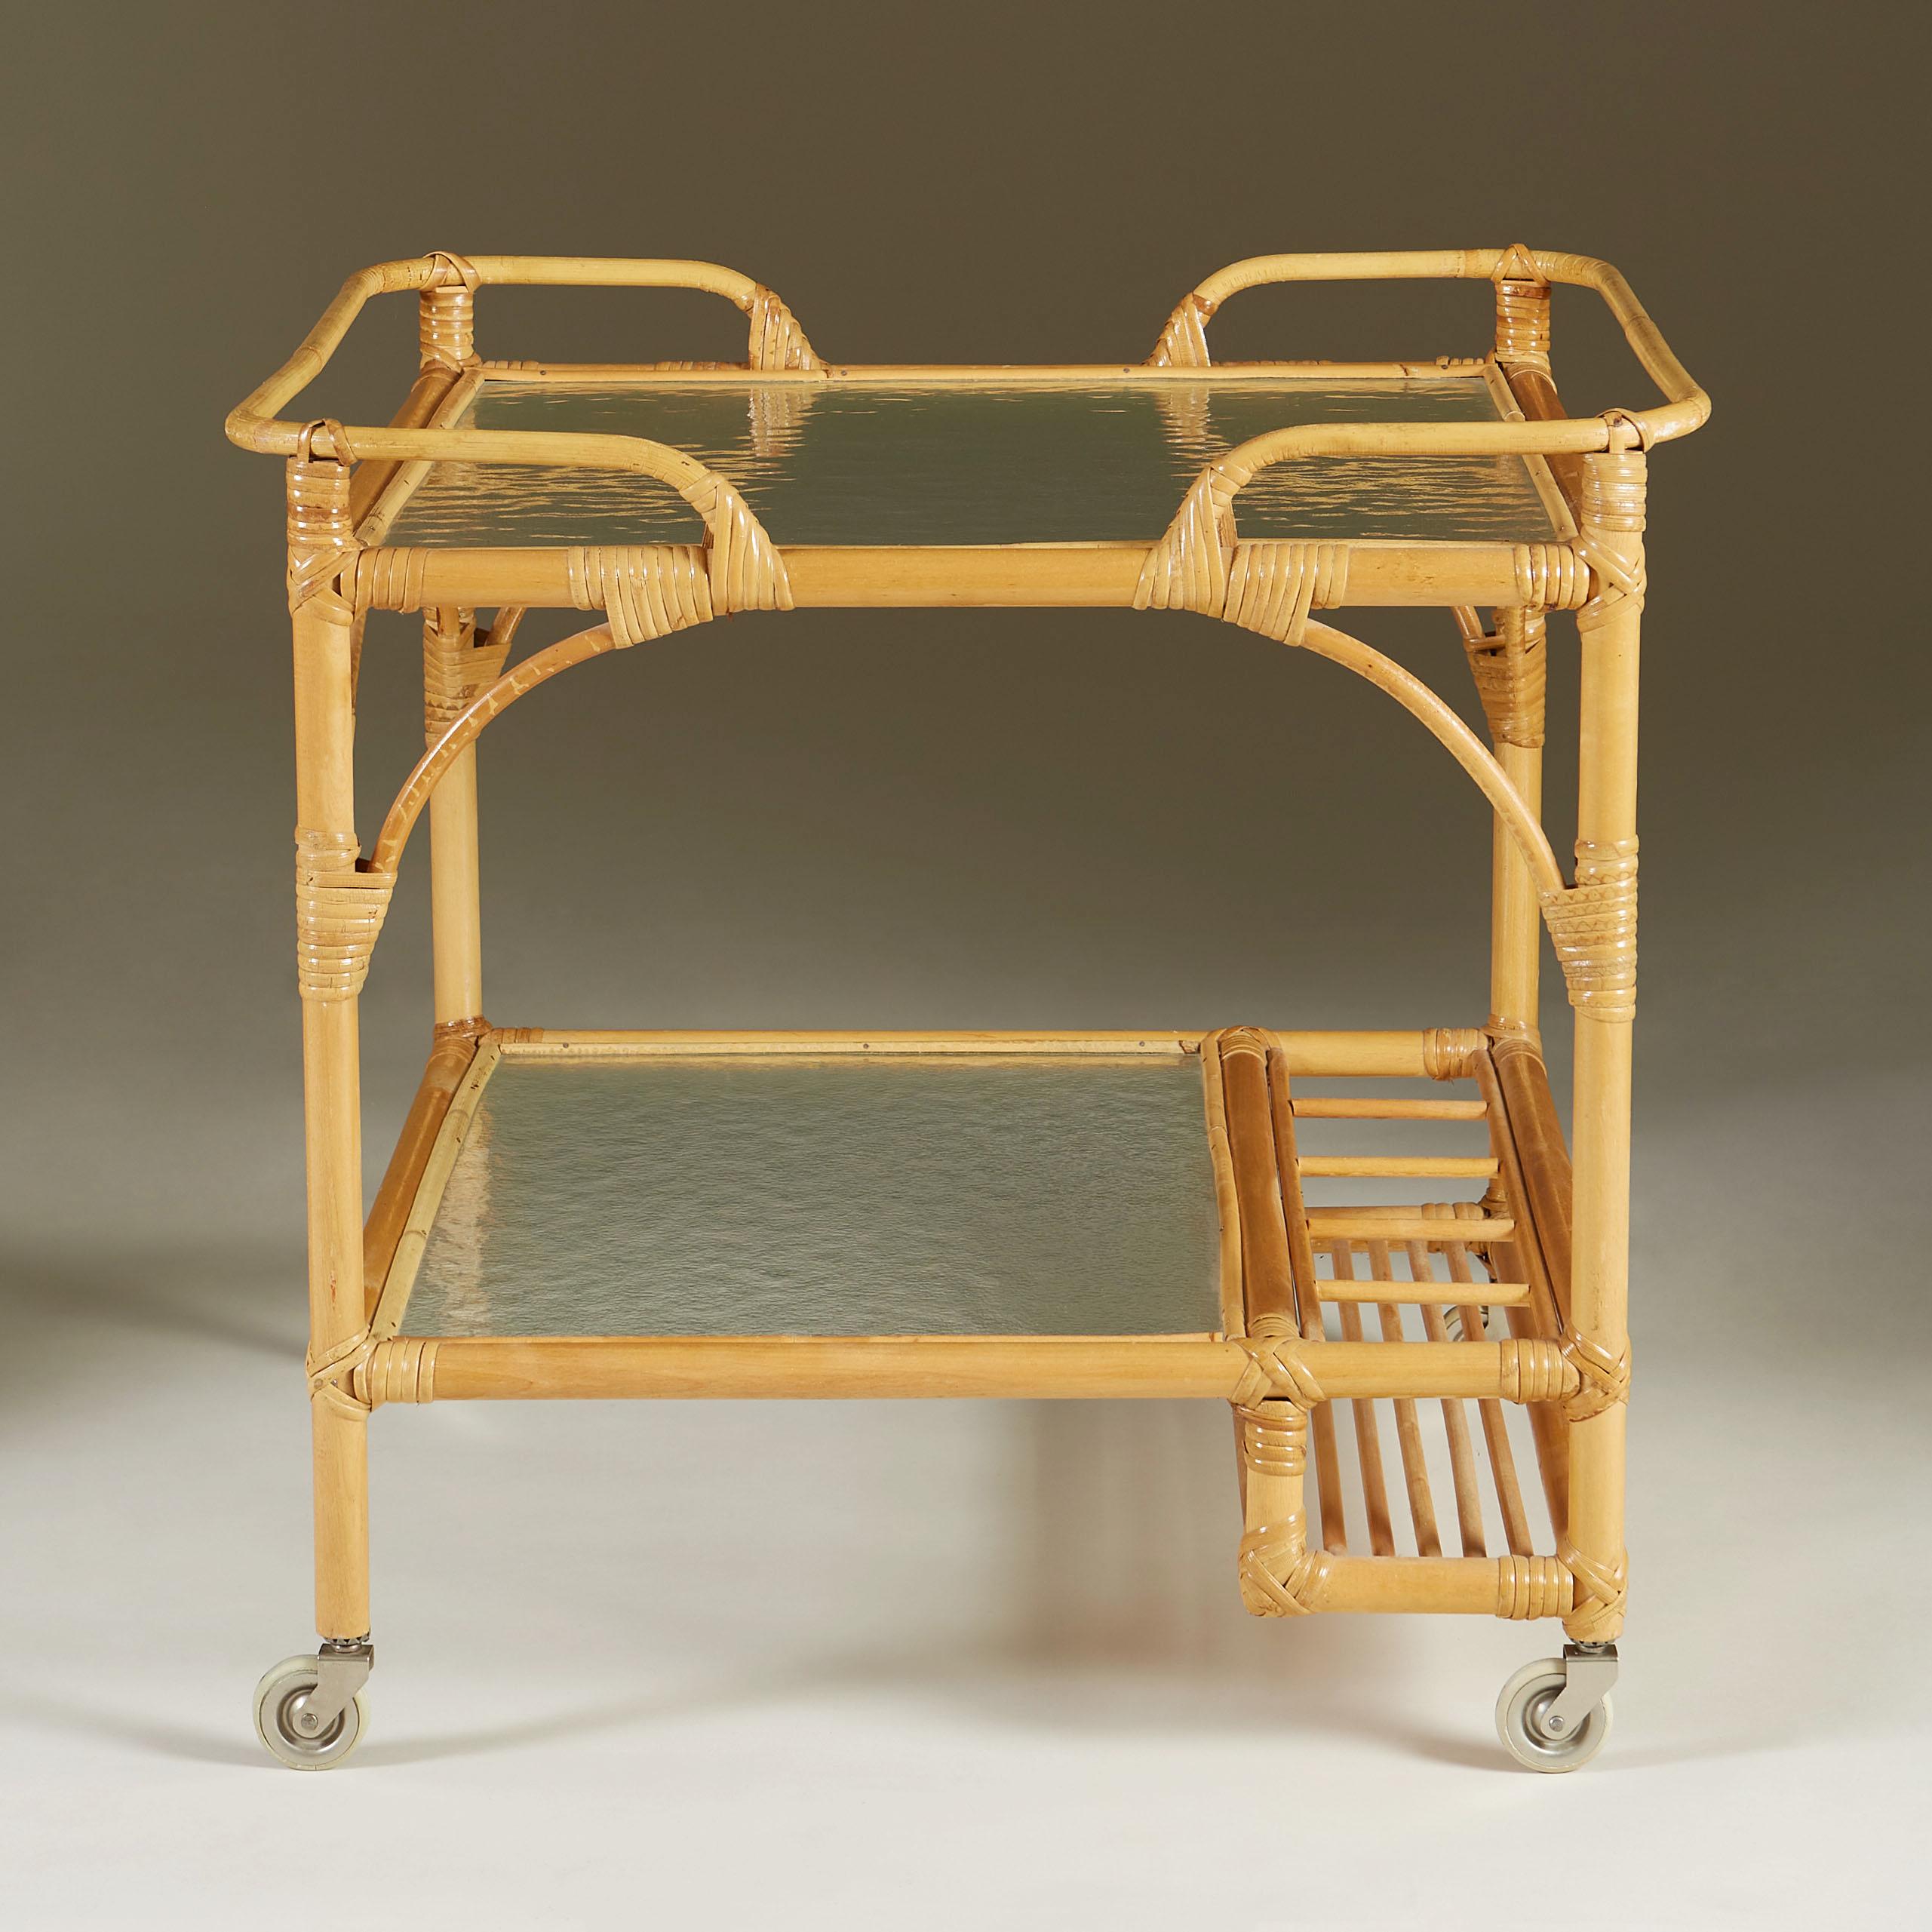 Two-tier serving trolley with glass shelves and useful 5 bottle holder. Sits on castor wheels for ease of movement.